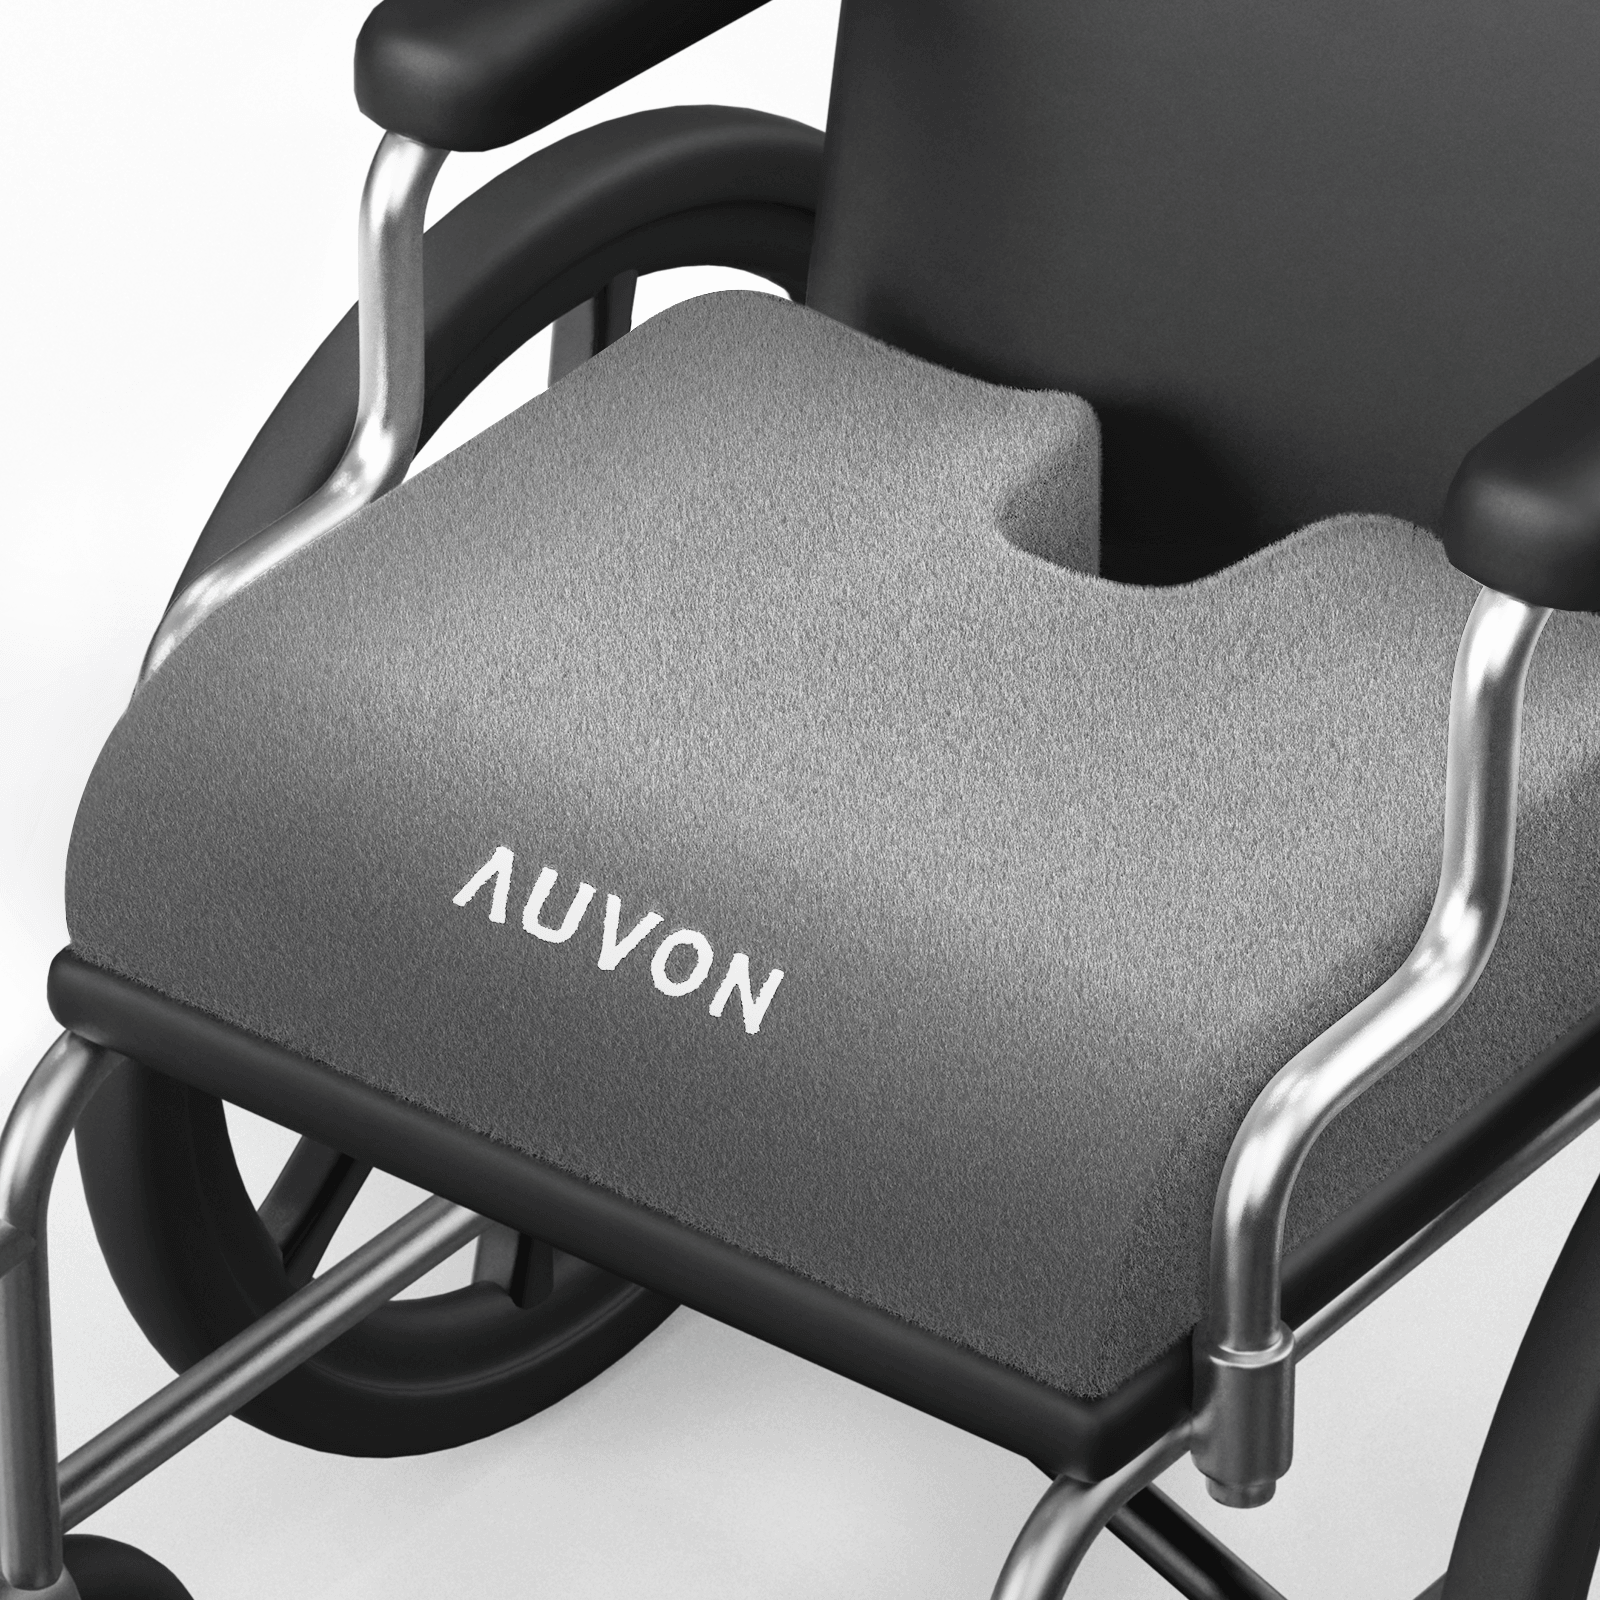 AUVON Wheelchair Seat Cushions (18"x16"x3") for Sciatica, Back, Coccyx, Pressure Sore and Ulcer Pain Relief, Memory Foam Pressure Relief Cushion with Removable Strap, Breathable & Waterproof Fabric - AUVON